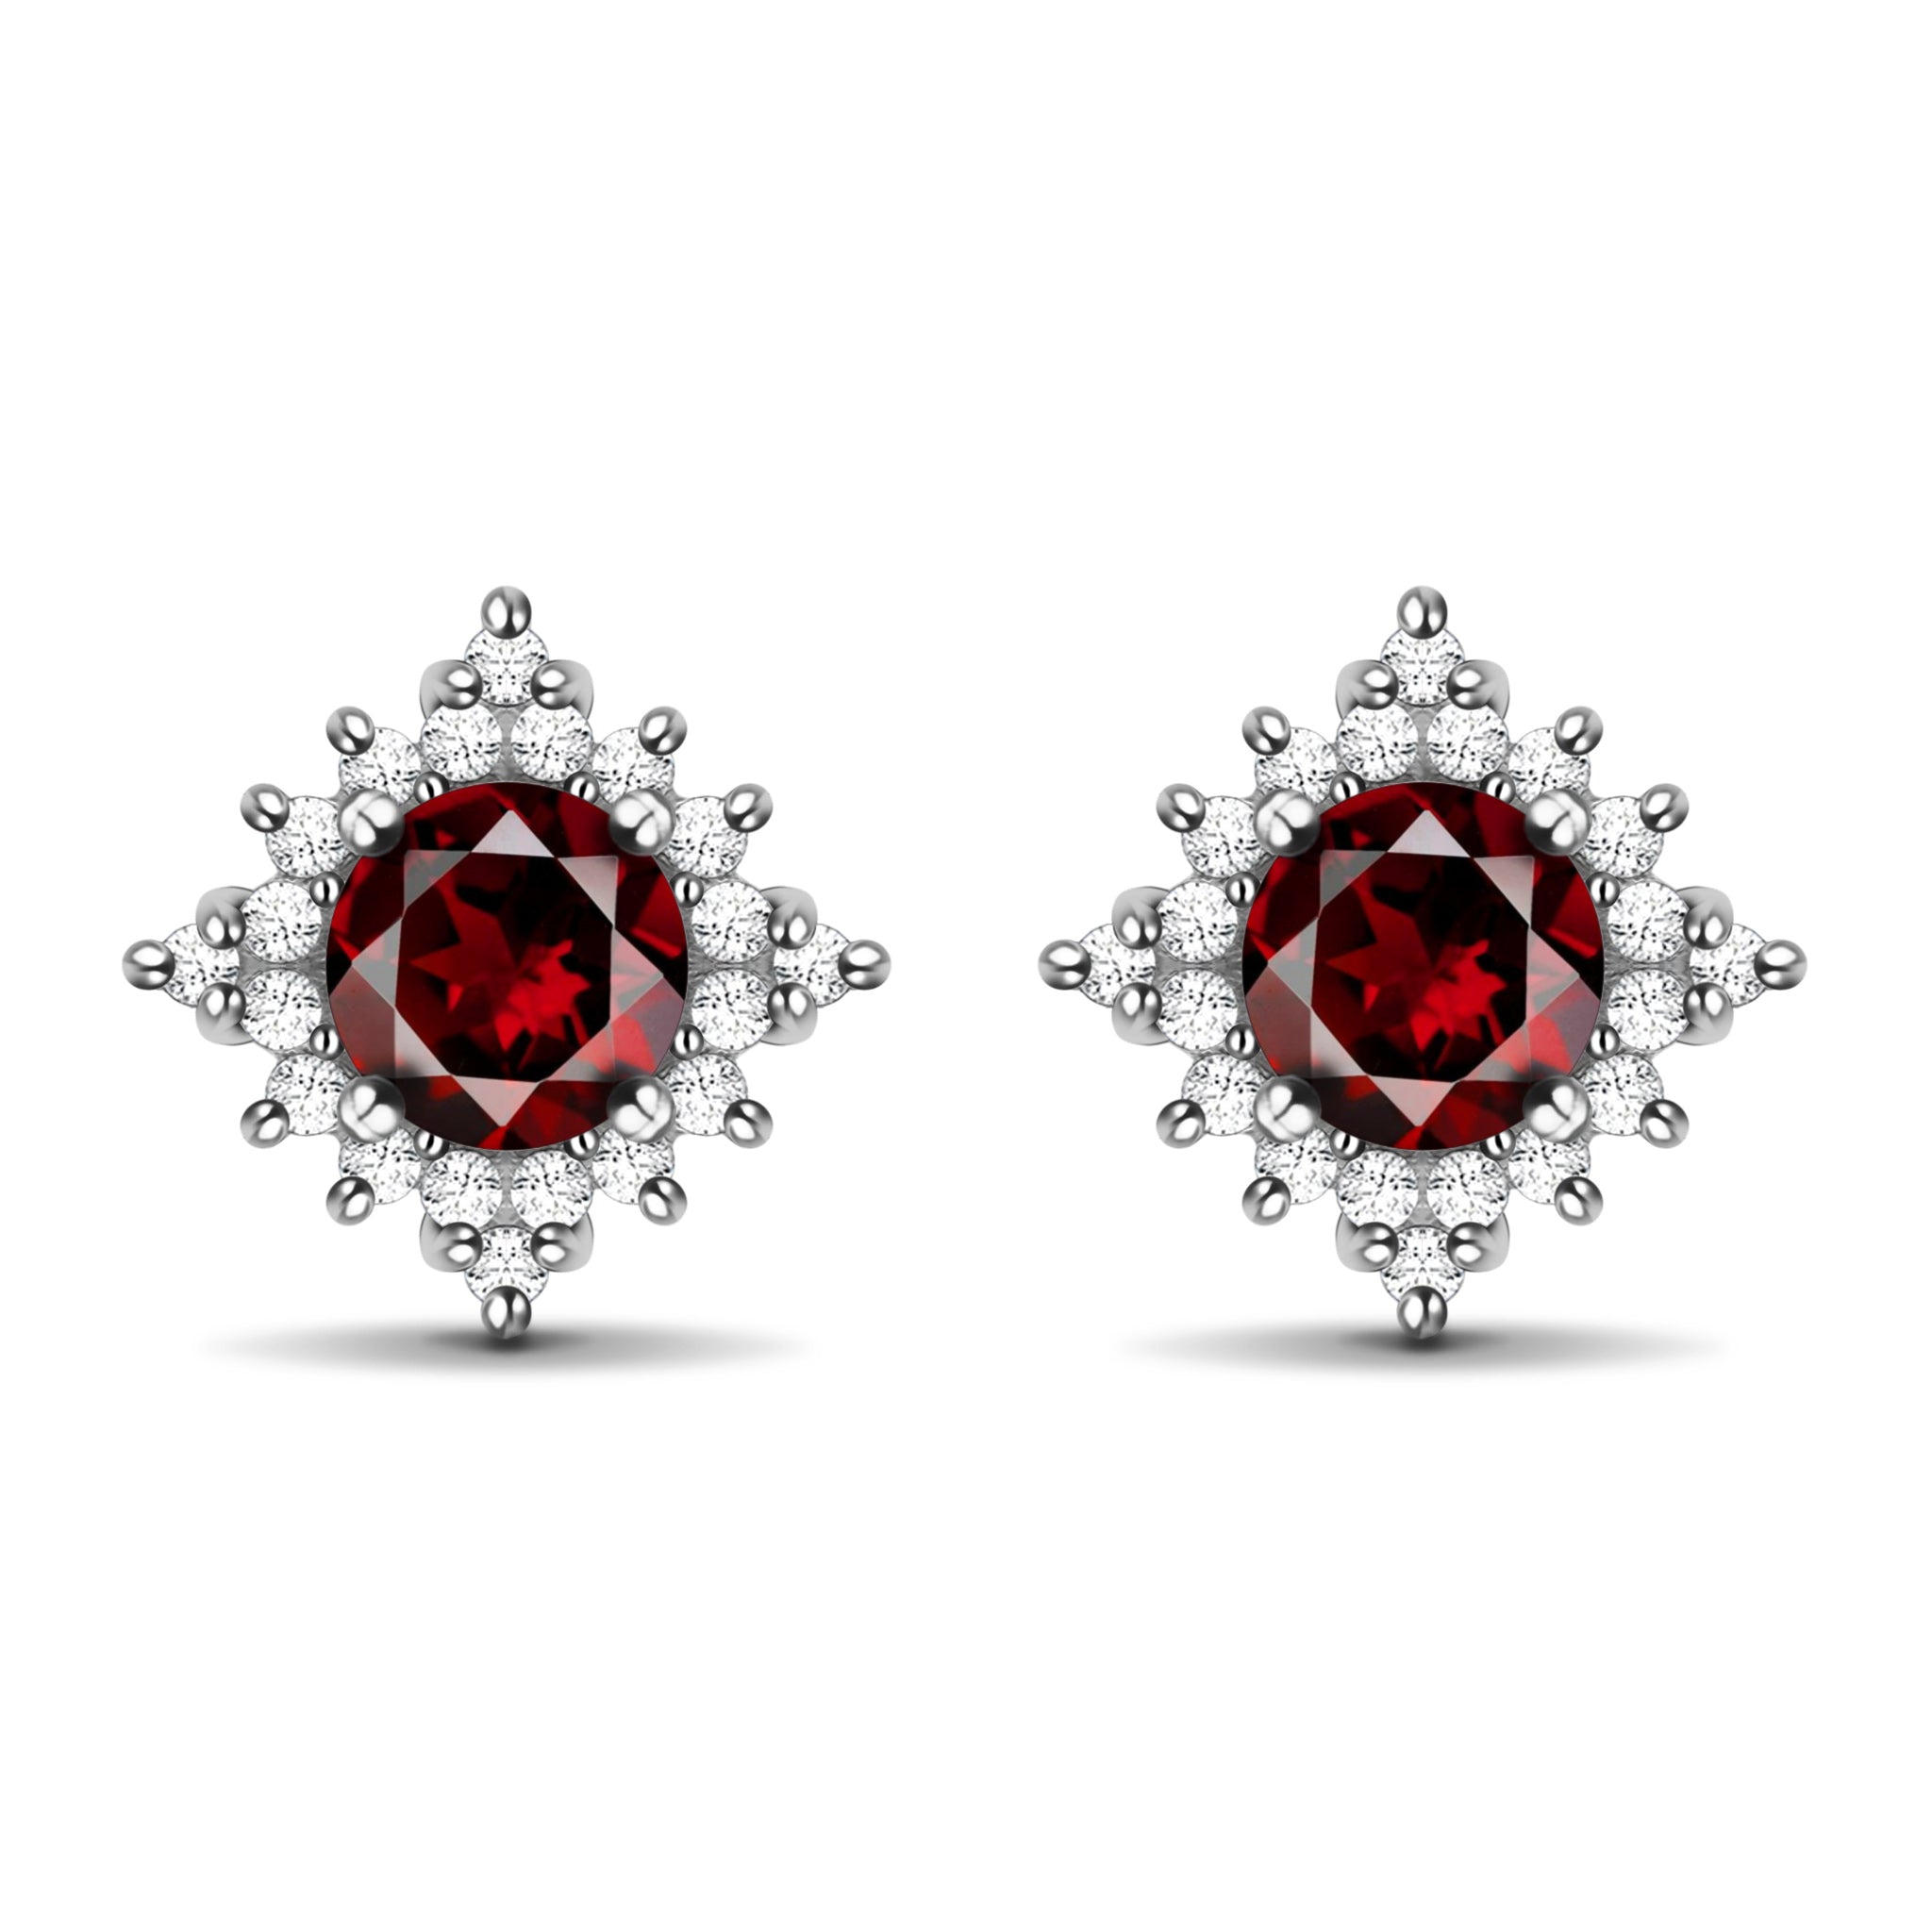 Dazzling Light Natural Round Red Garnet Sterling Silver Stud Earrings